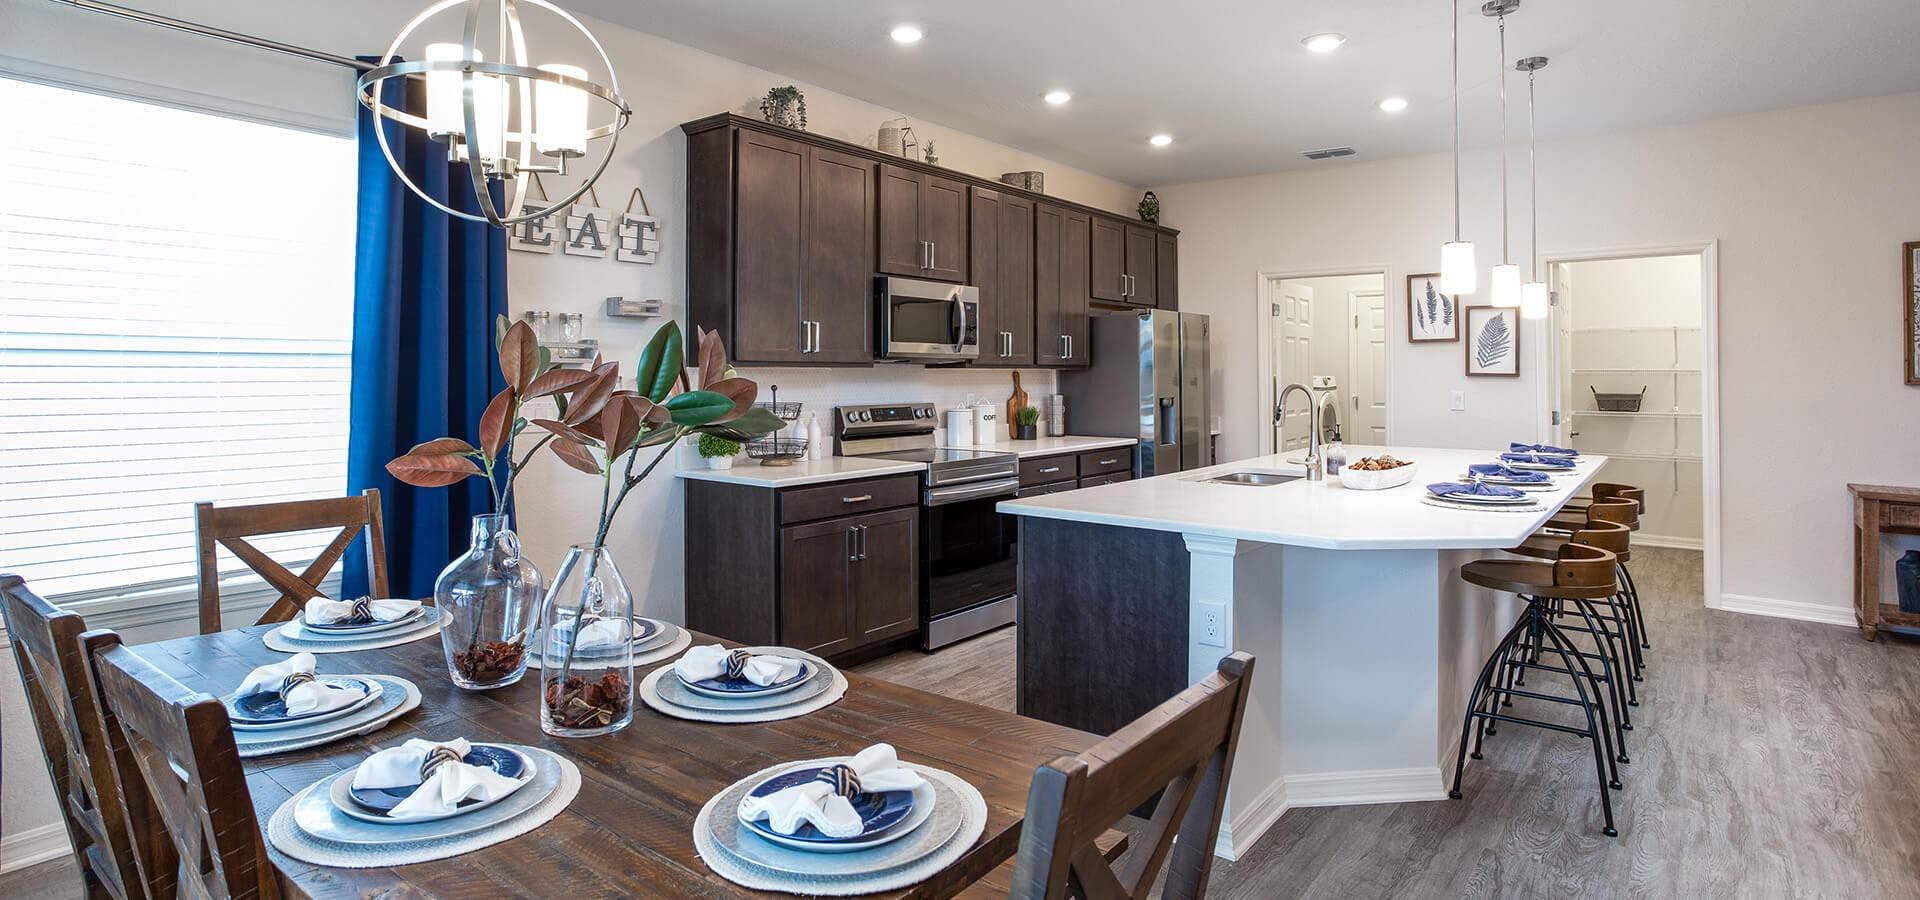 New model home in Davenport, FL showcasing an open kitchen with wood cabinets